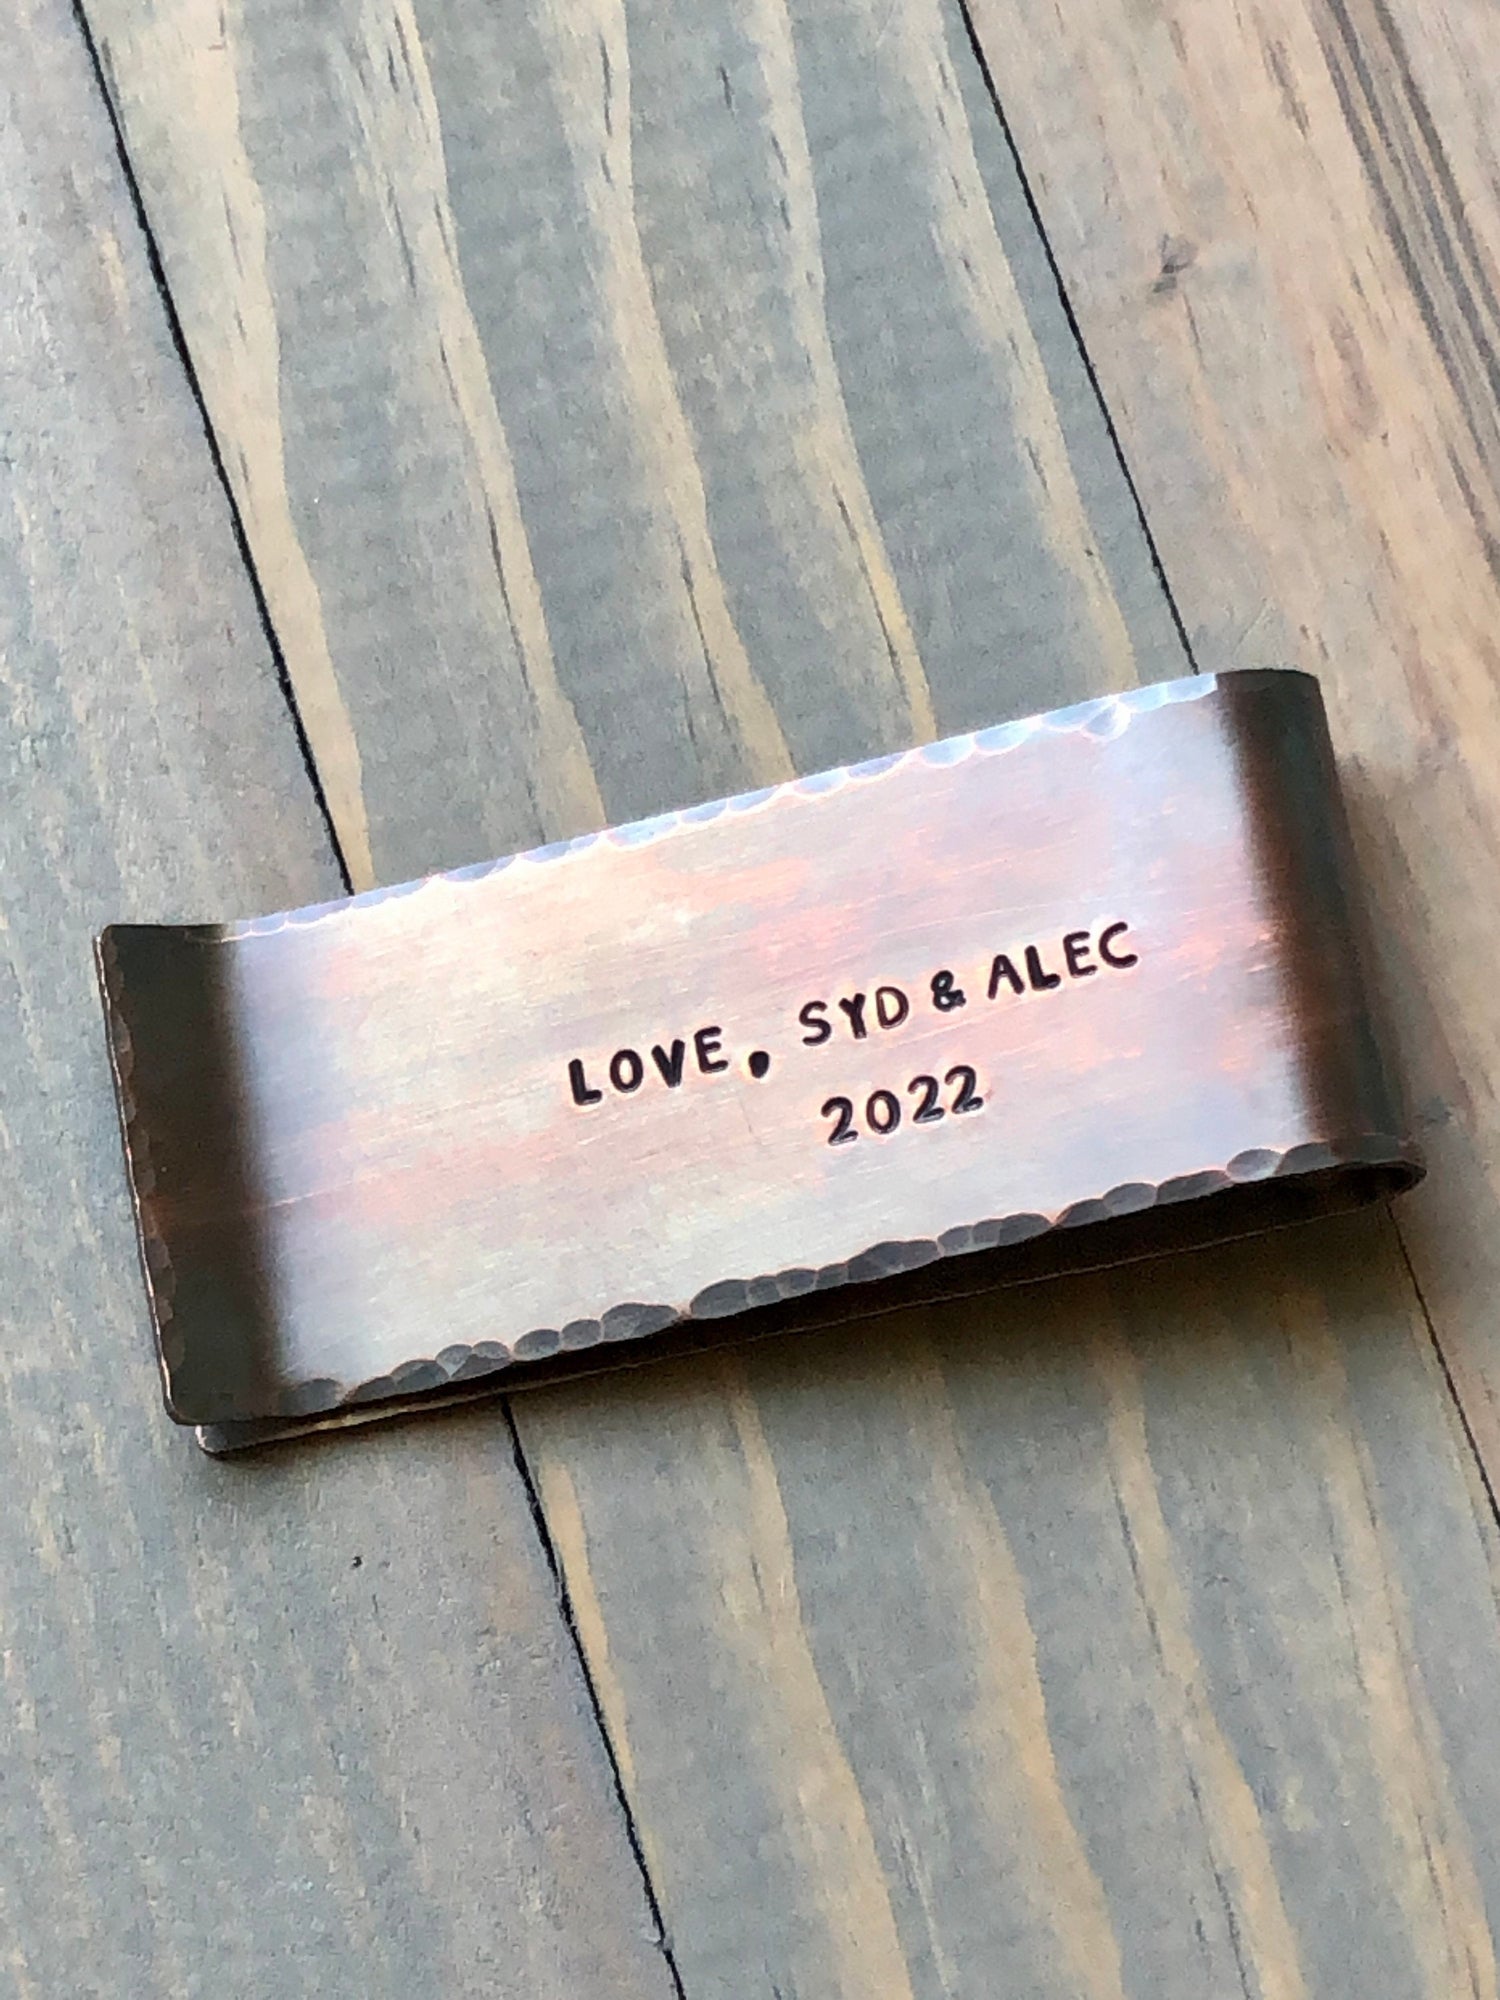 Copper Money Clip for Dad- Father's Day Gift - Personalized Master of the Grill Money Clip - Barbeque Money Holder for Father